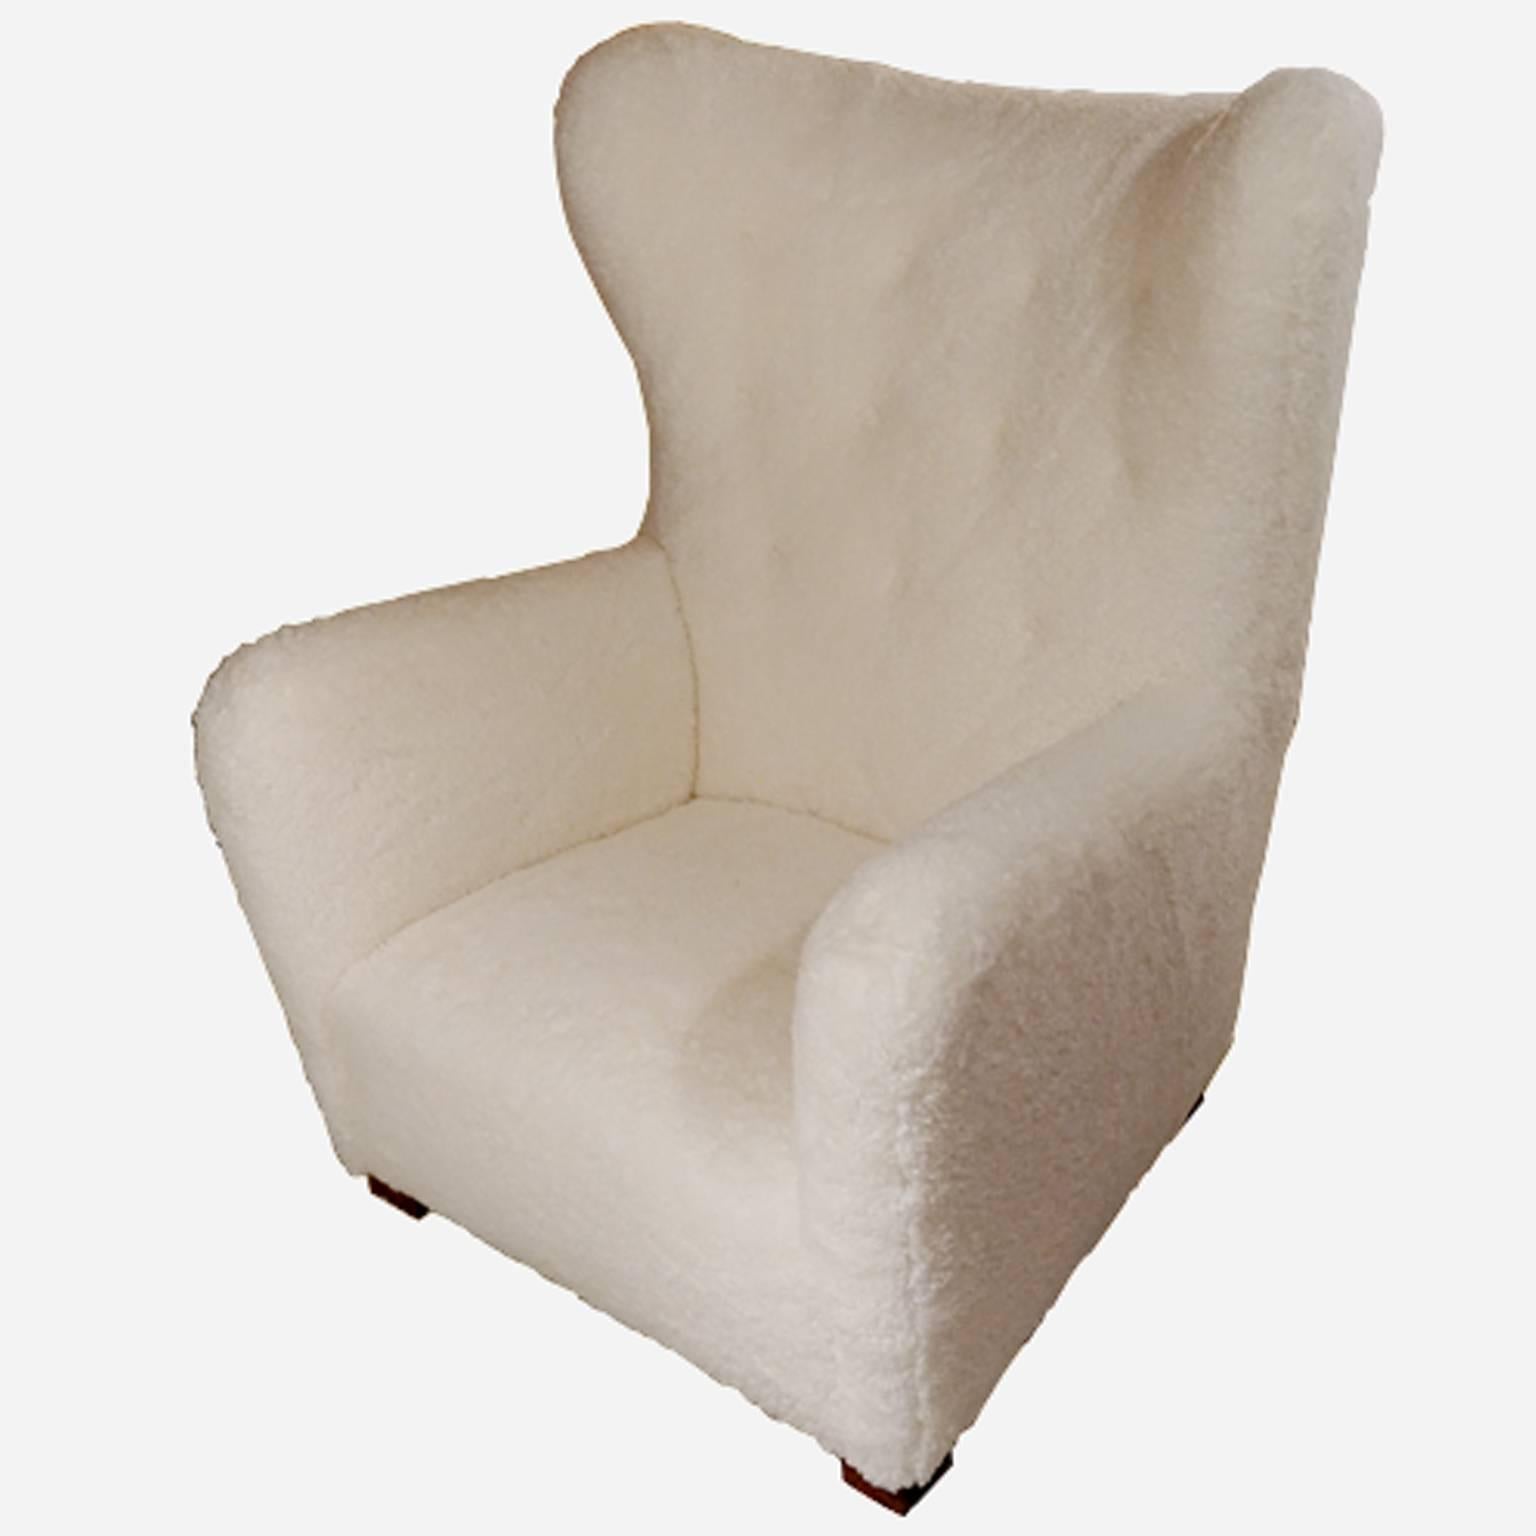 One Wingback Lounge Chair by Fritz Hansen, White Sheep Skin, 1940s In Excellent Condition For Sale In Paris, FR